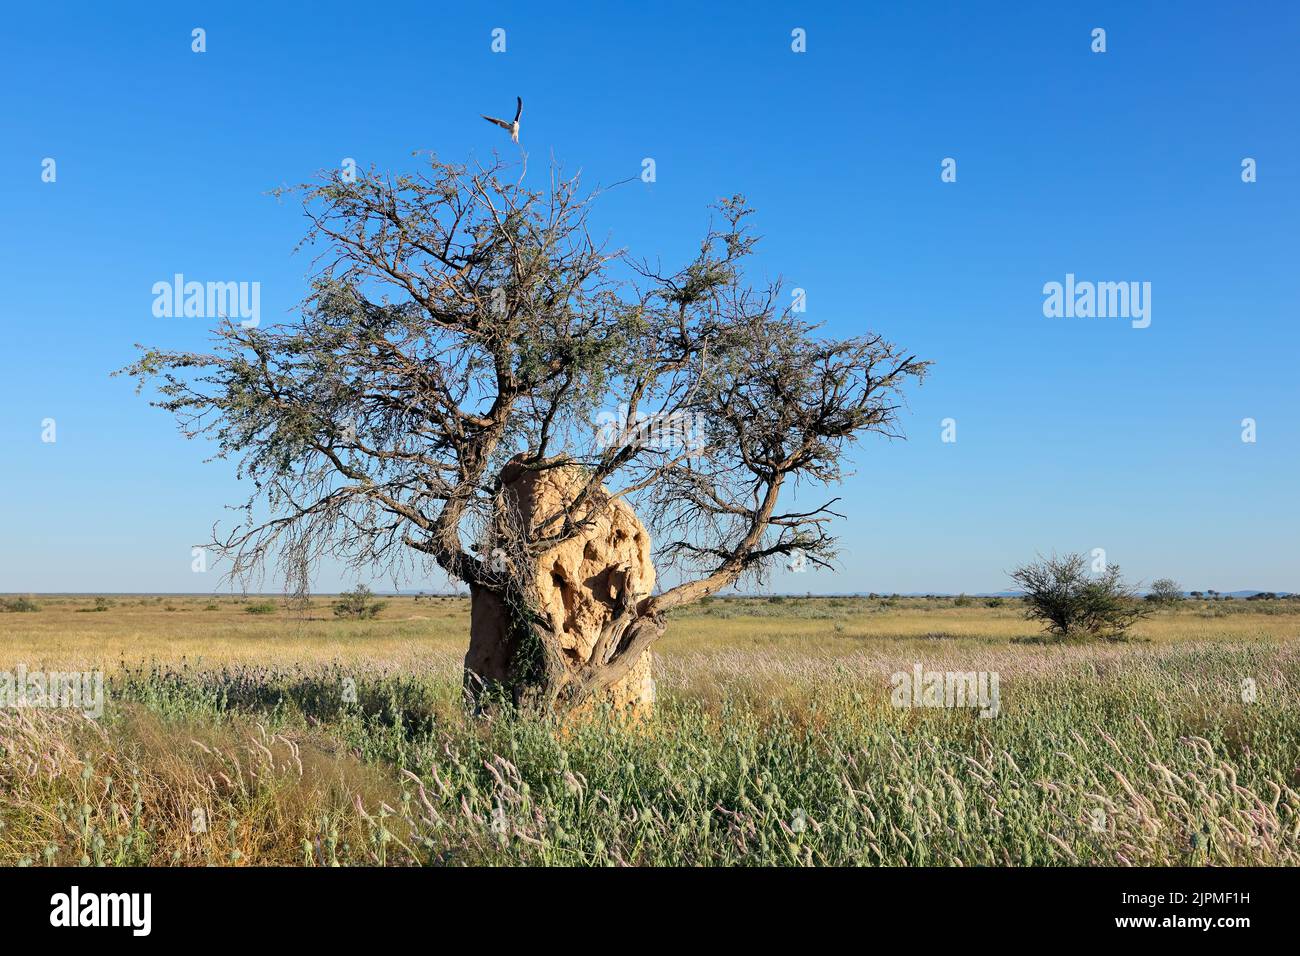 Landscape with a tree and termite mound against a blue sky, Etosha National Park, Namibia Stock Photo